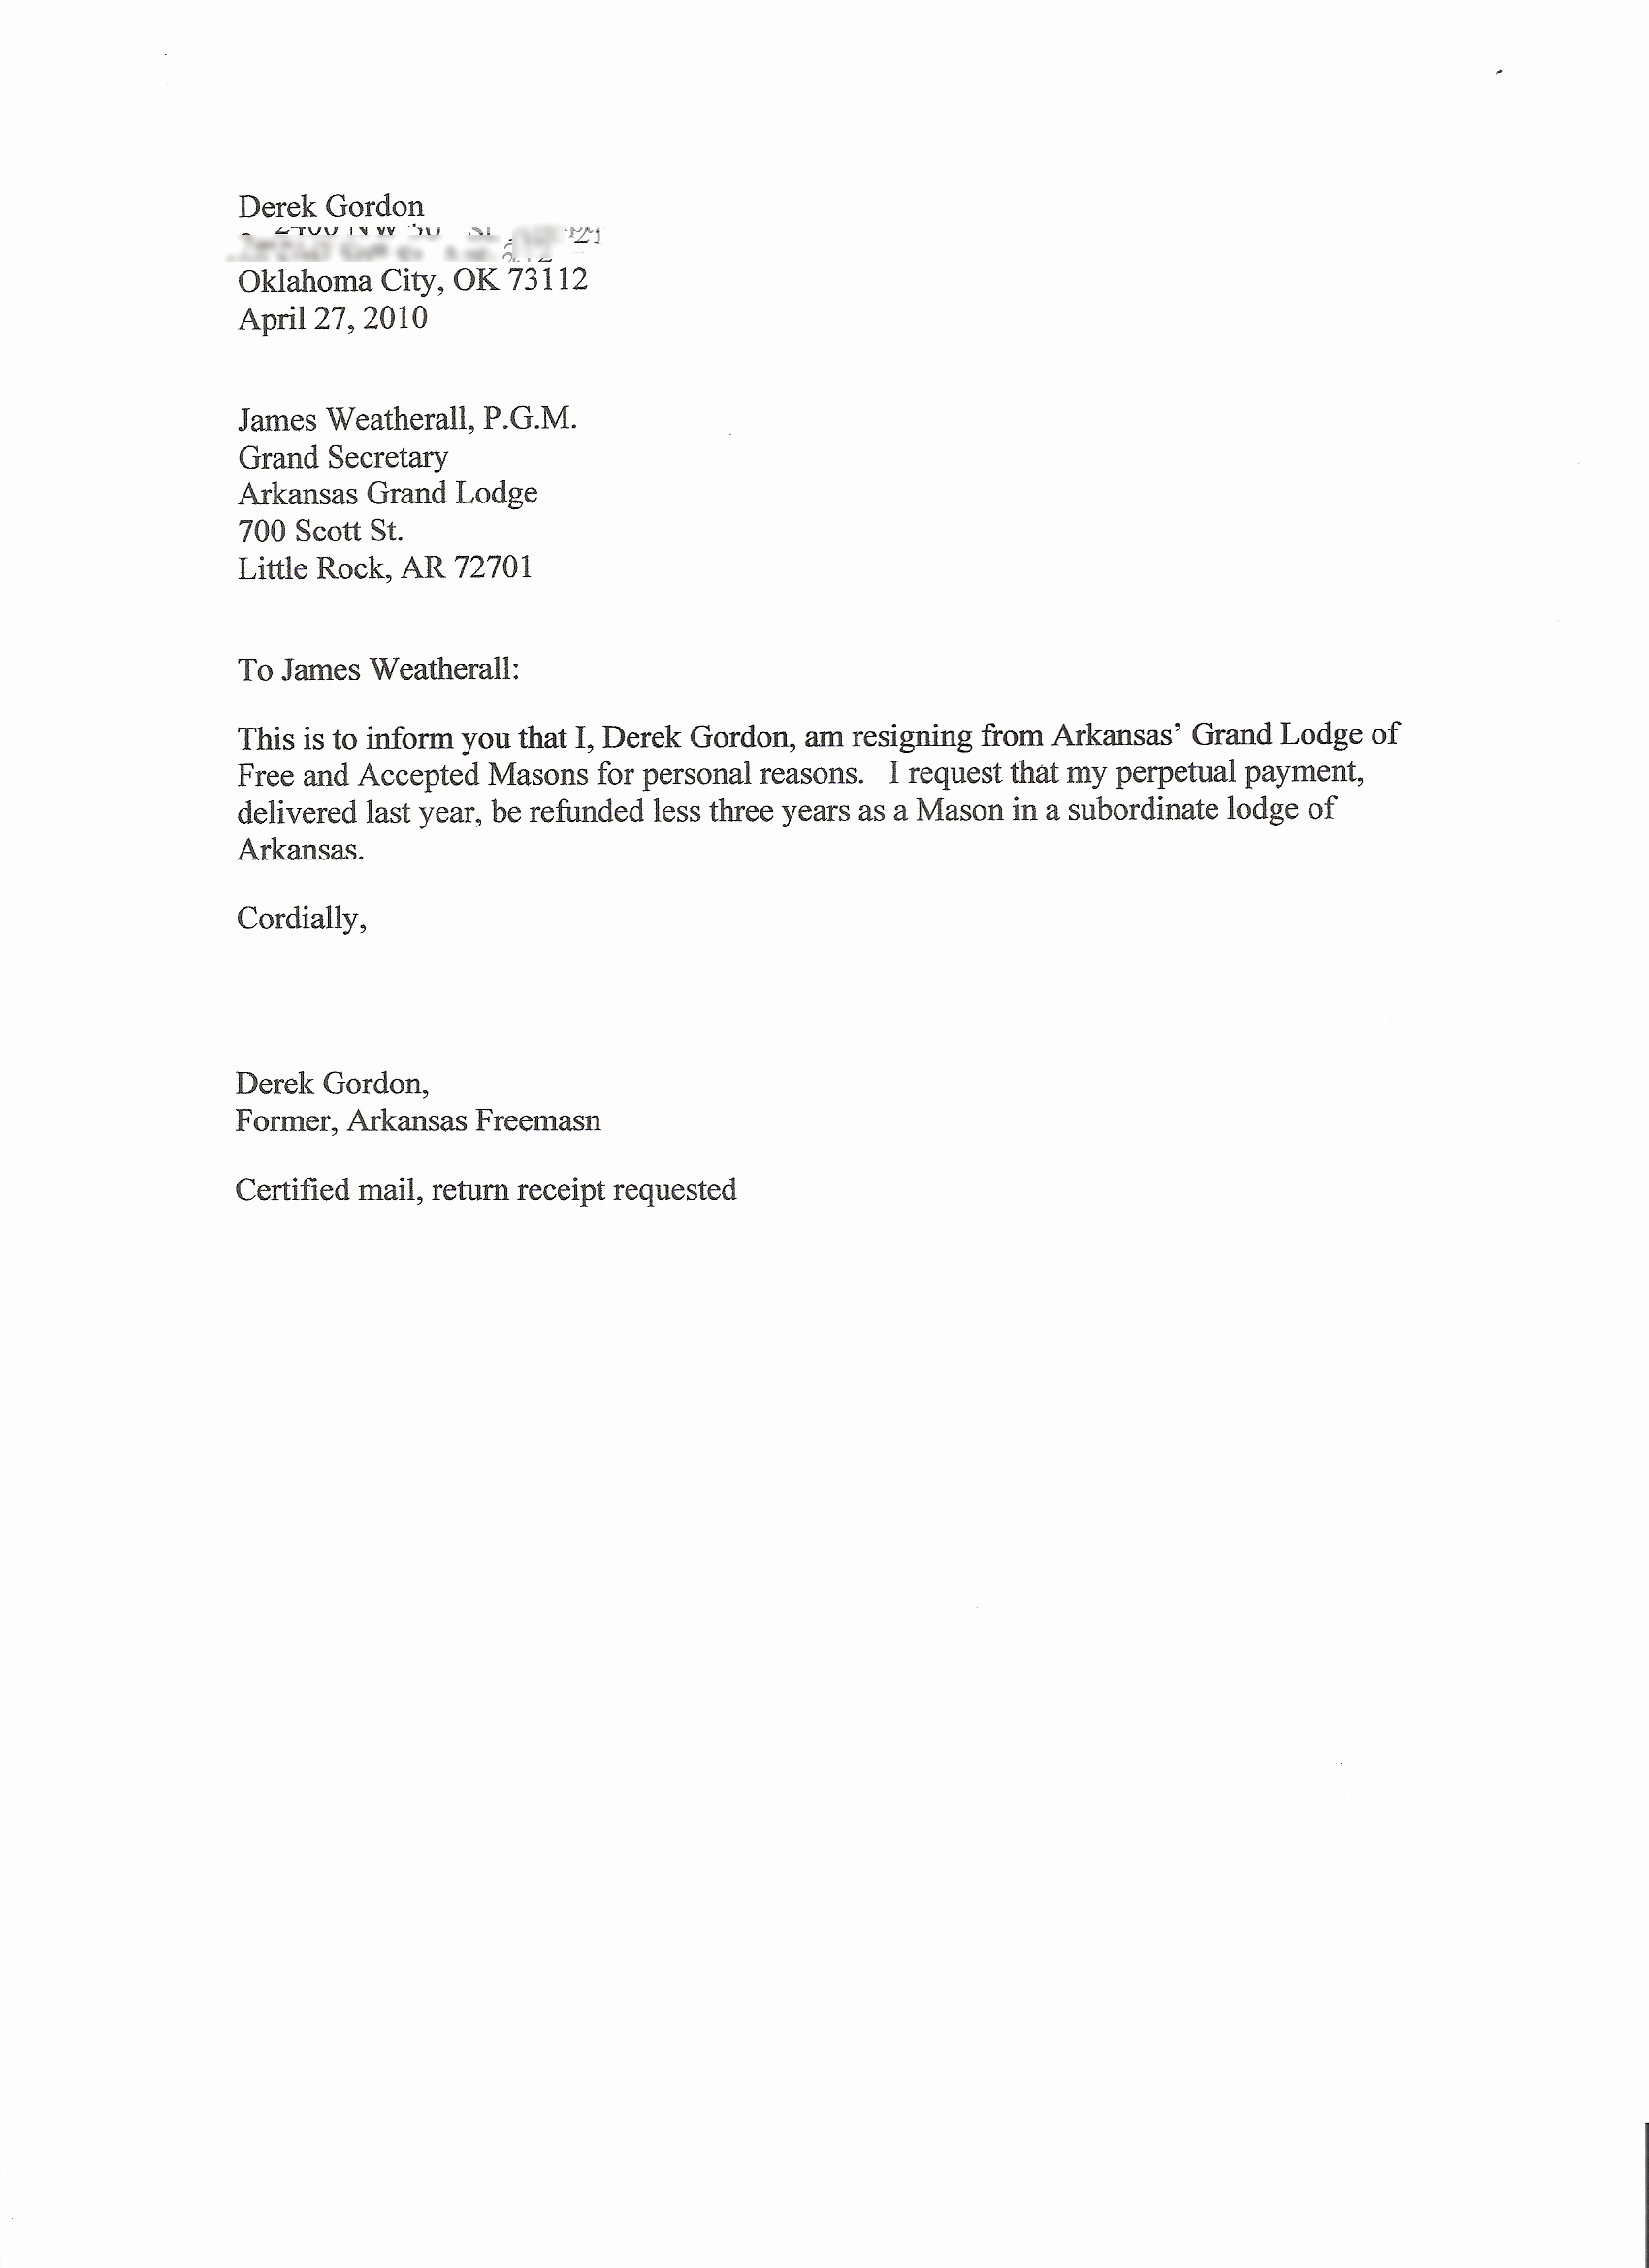 Resignation Letter Template Free Best Of Dos and Don’ts for A Resignation Letter